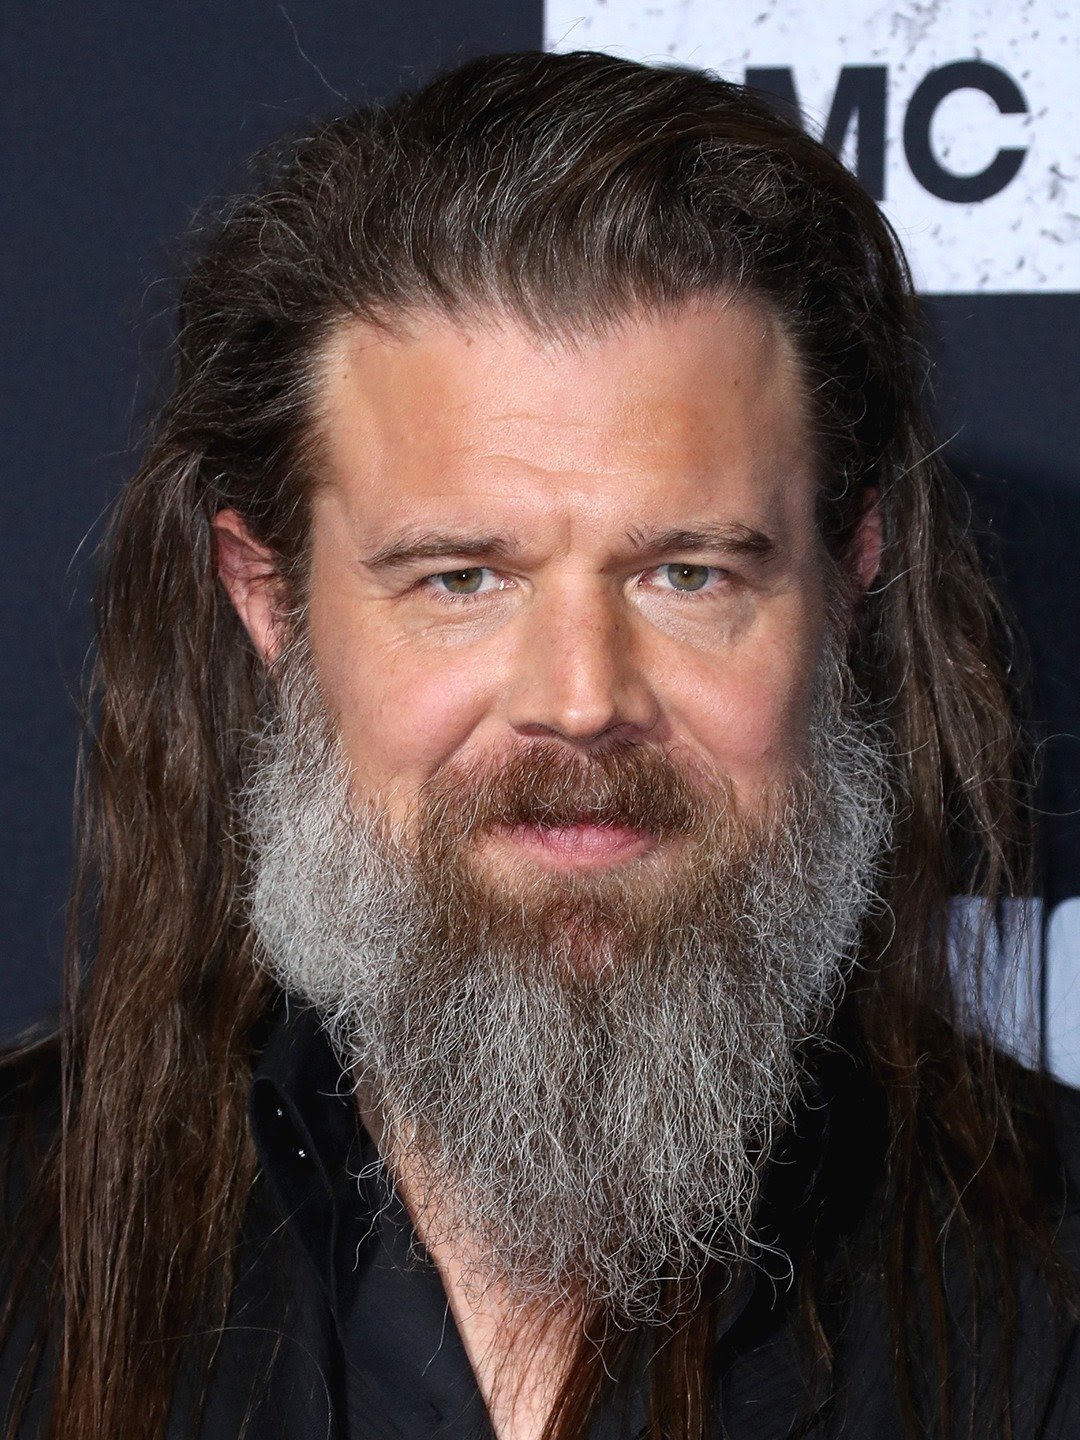 Geoff Keighley on X: RYAN HURST will be playing THOR in GOD OF